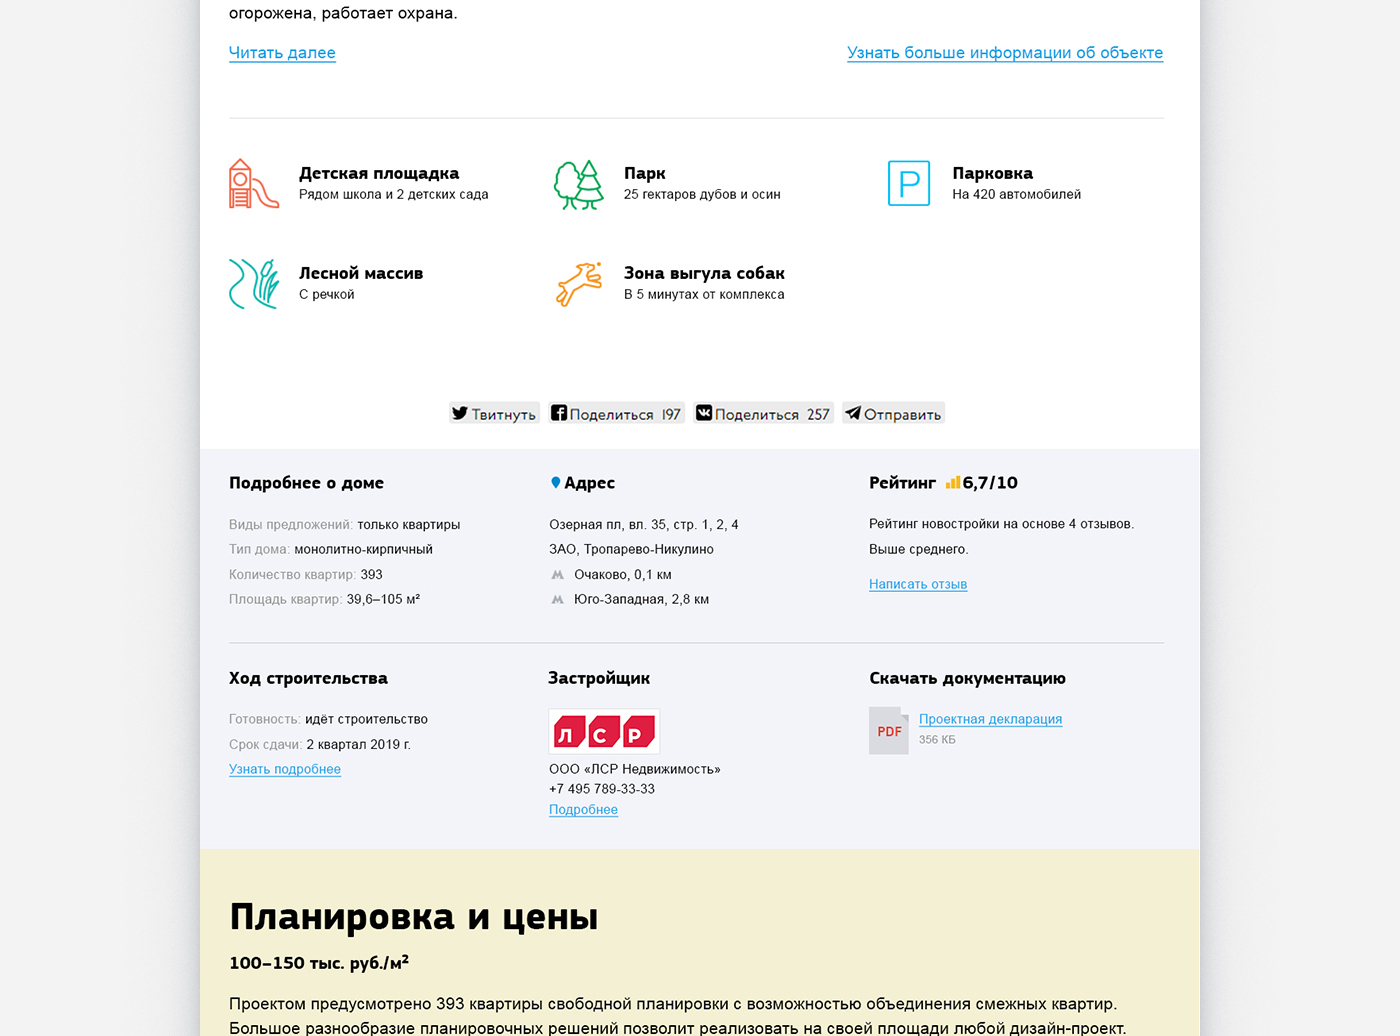 realestate Moscow Webdesign redesign services